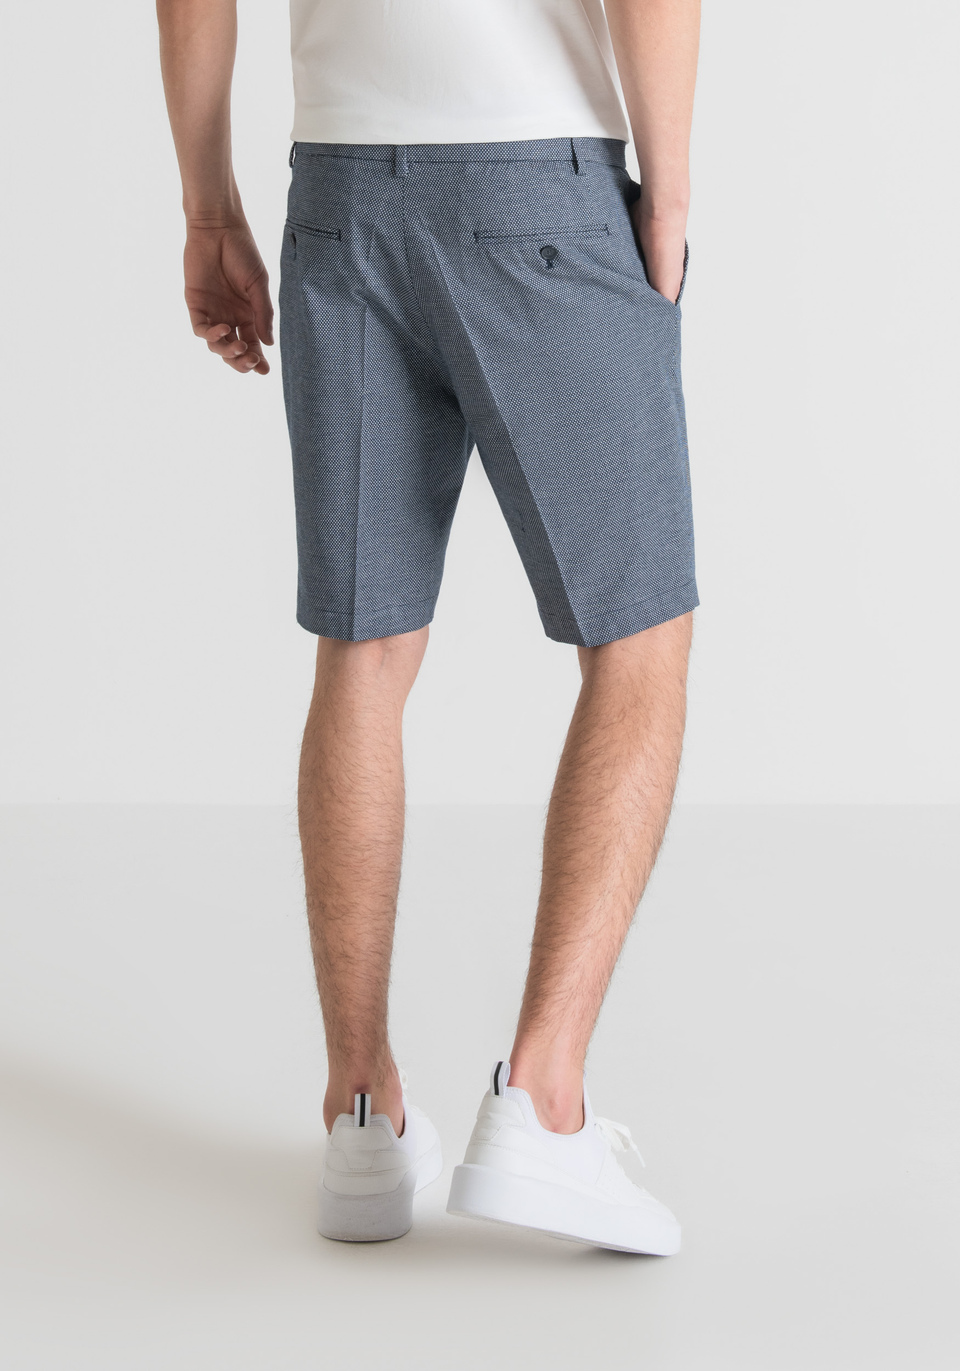 “BRYAN” SKINNY-FIT SHORTS IN STRETCH COTTON WITH MICRO-PATTERN - Antony Morato Online Shop